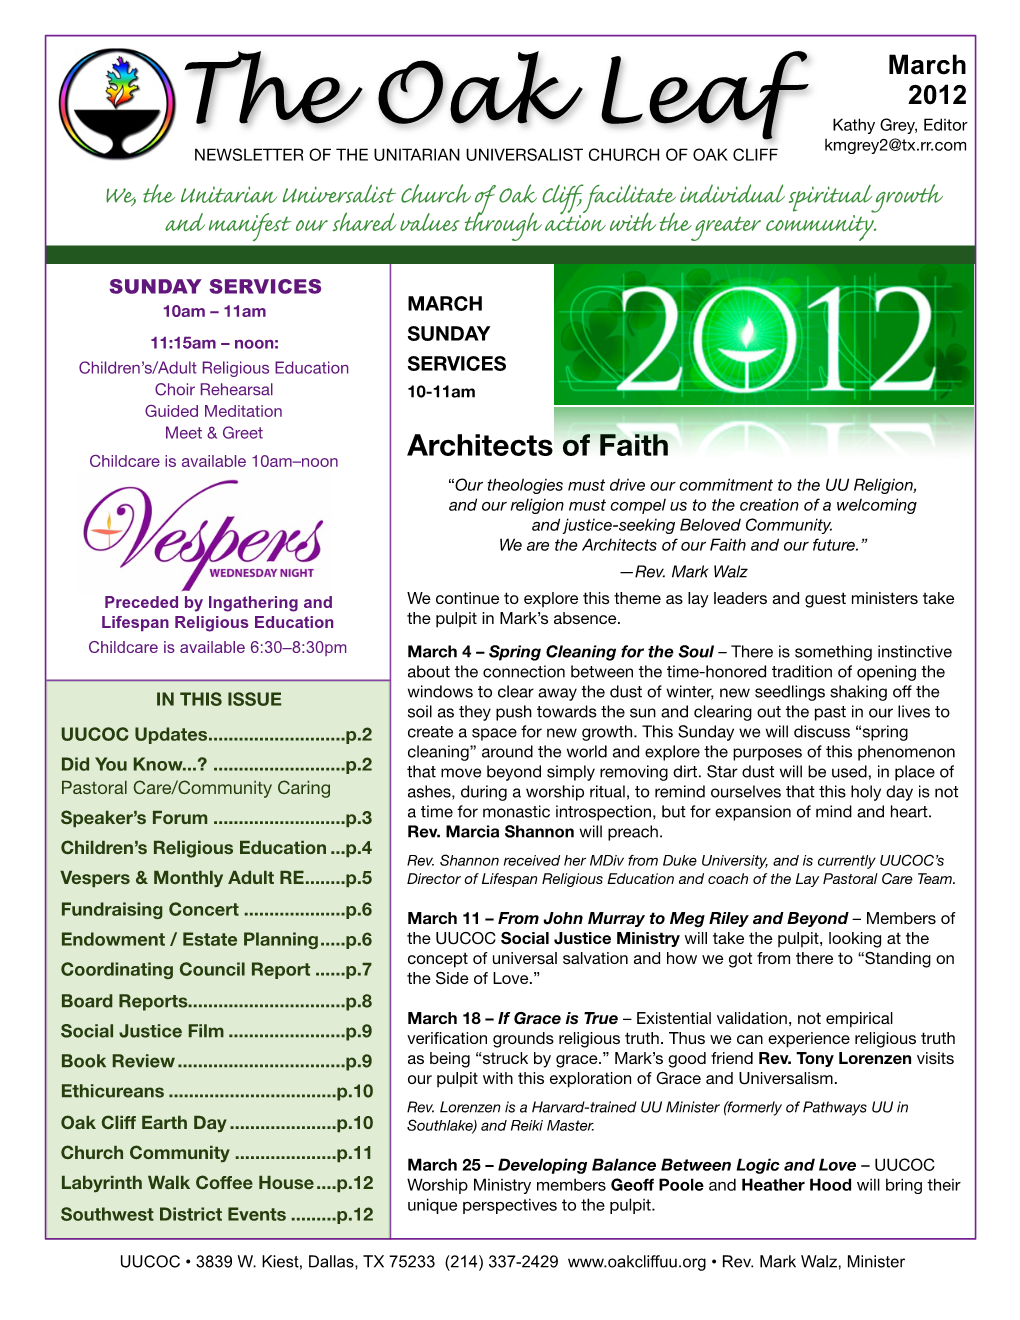 MARCH 2012 Newslettere